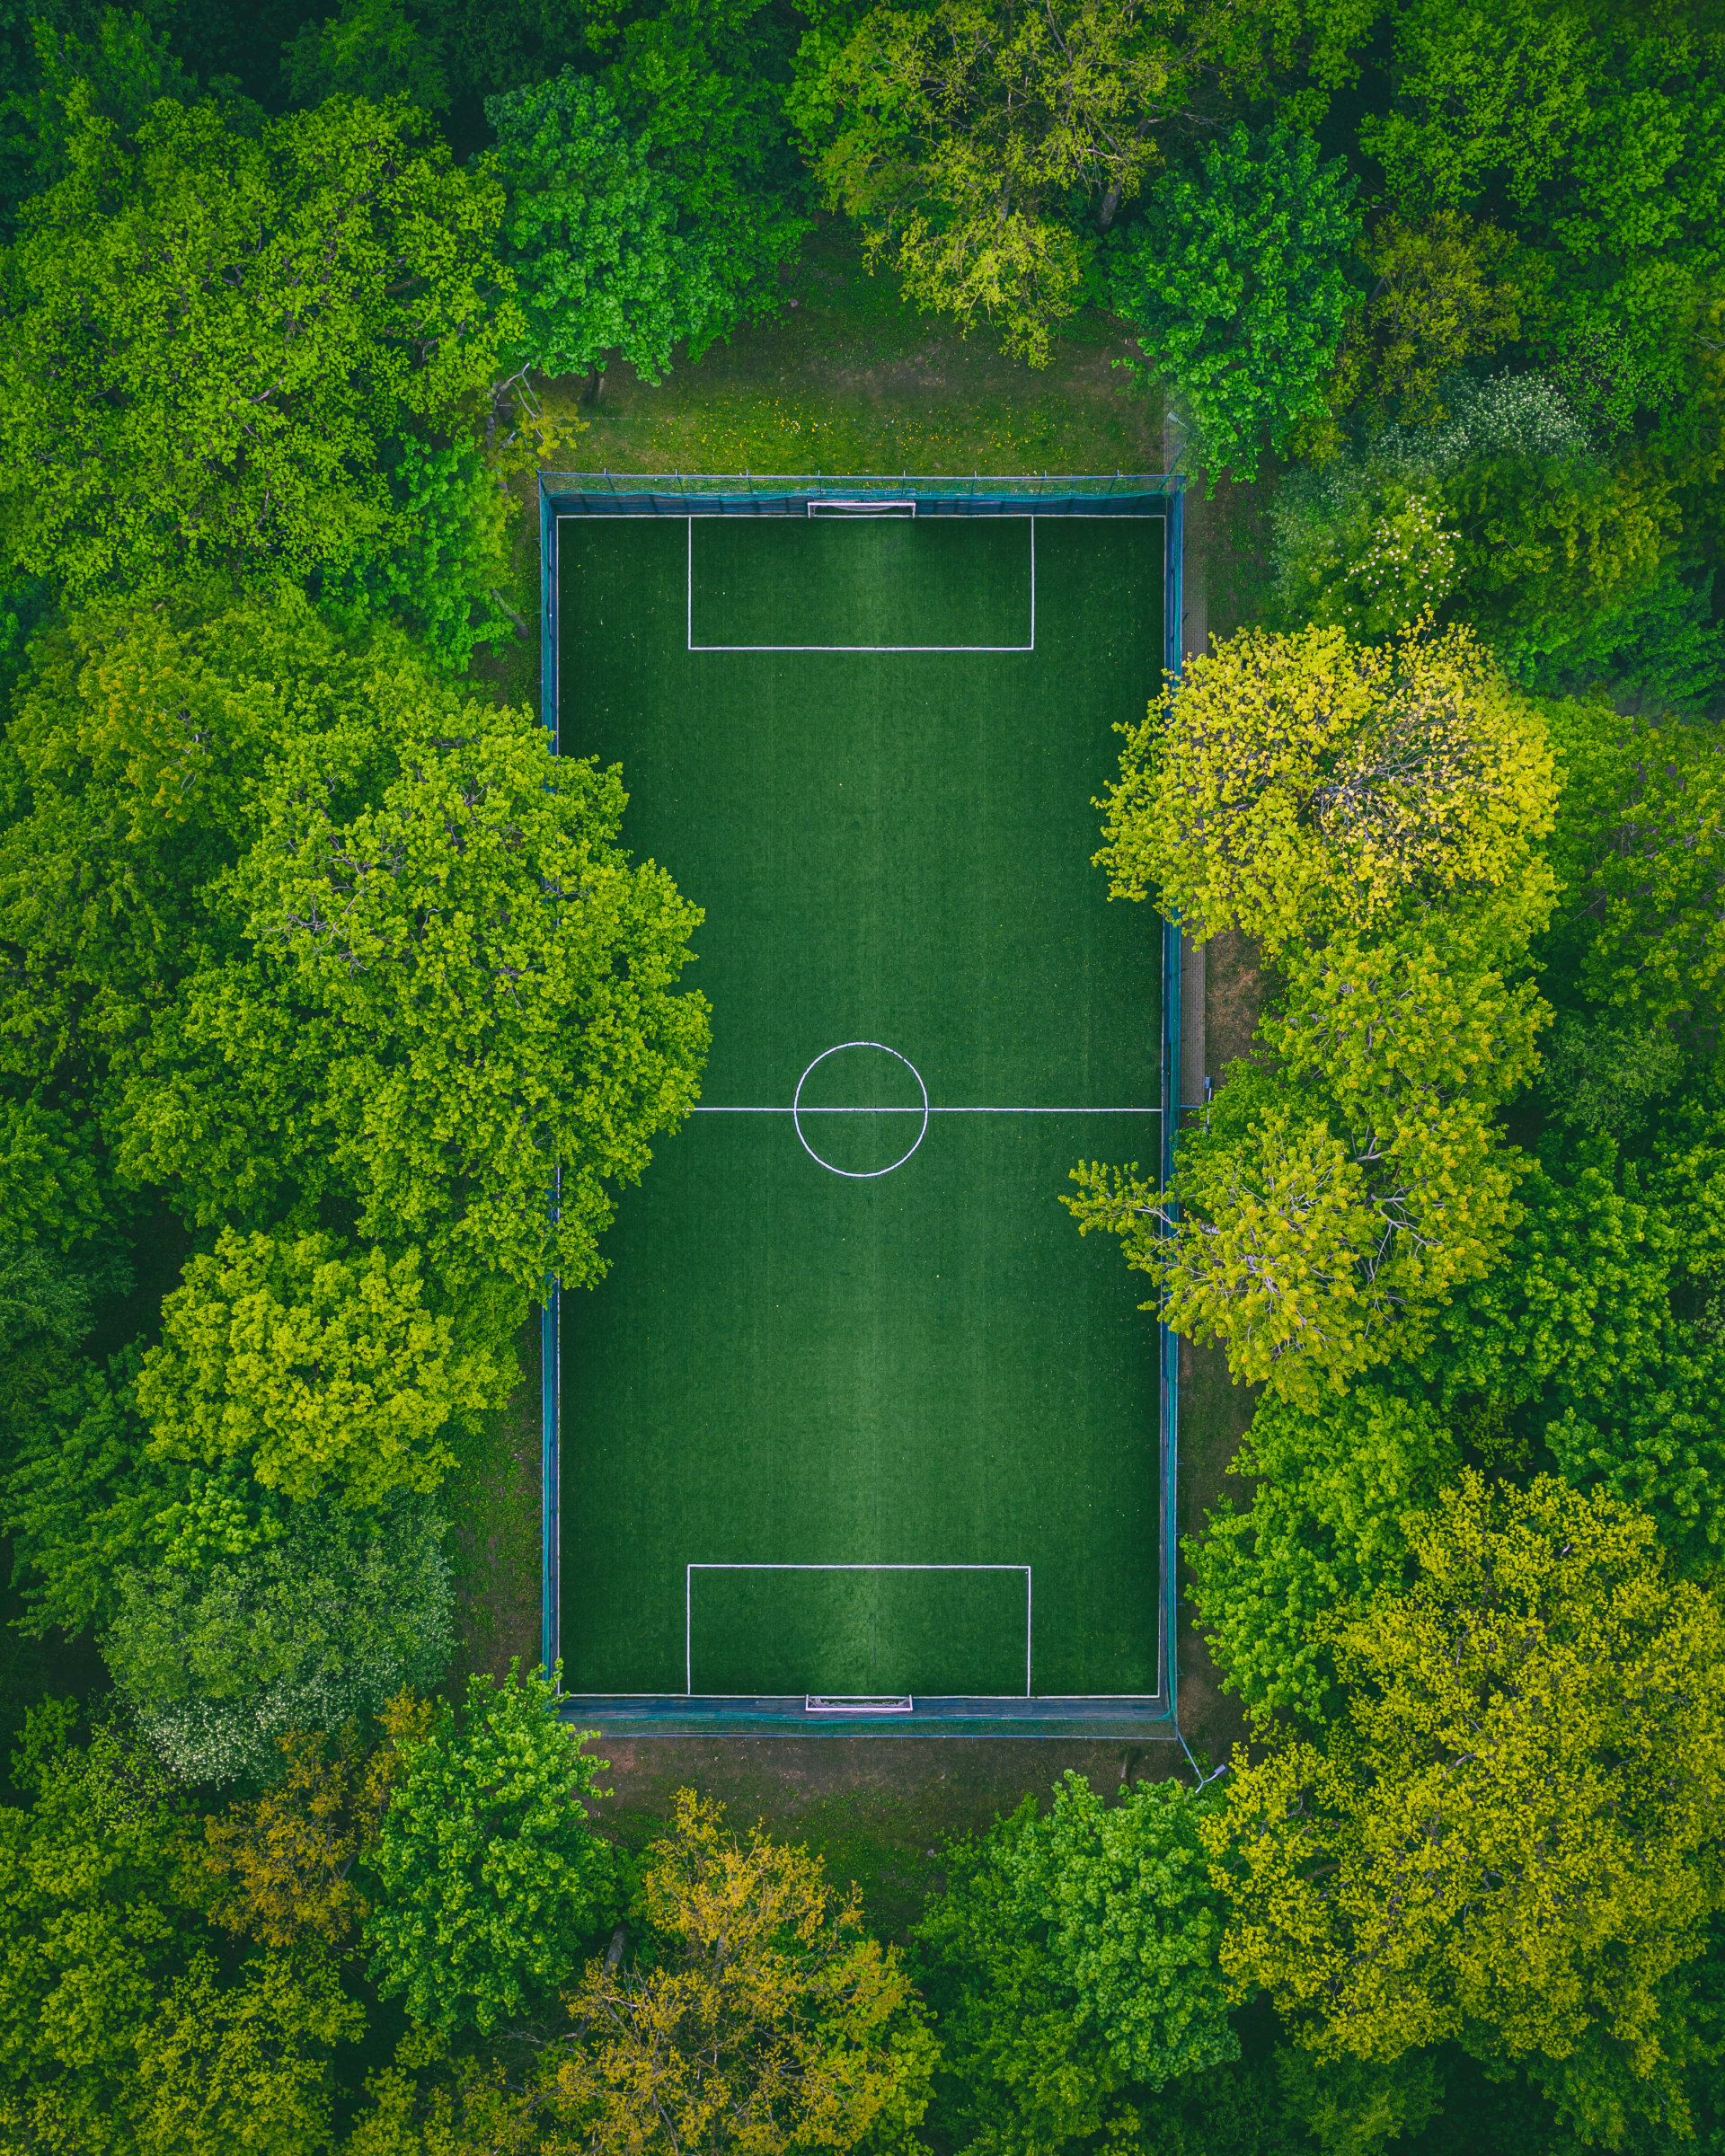 green, view from above, sports, football field, trees, playground, platform